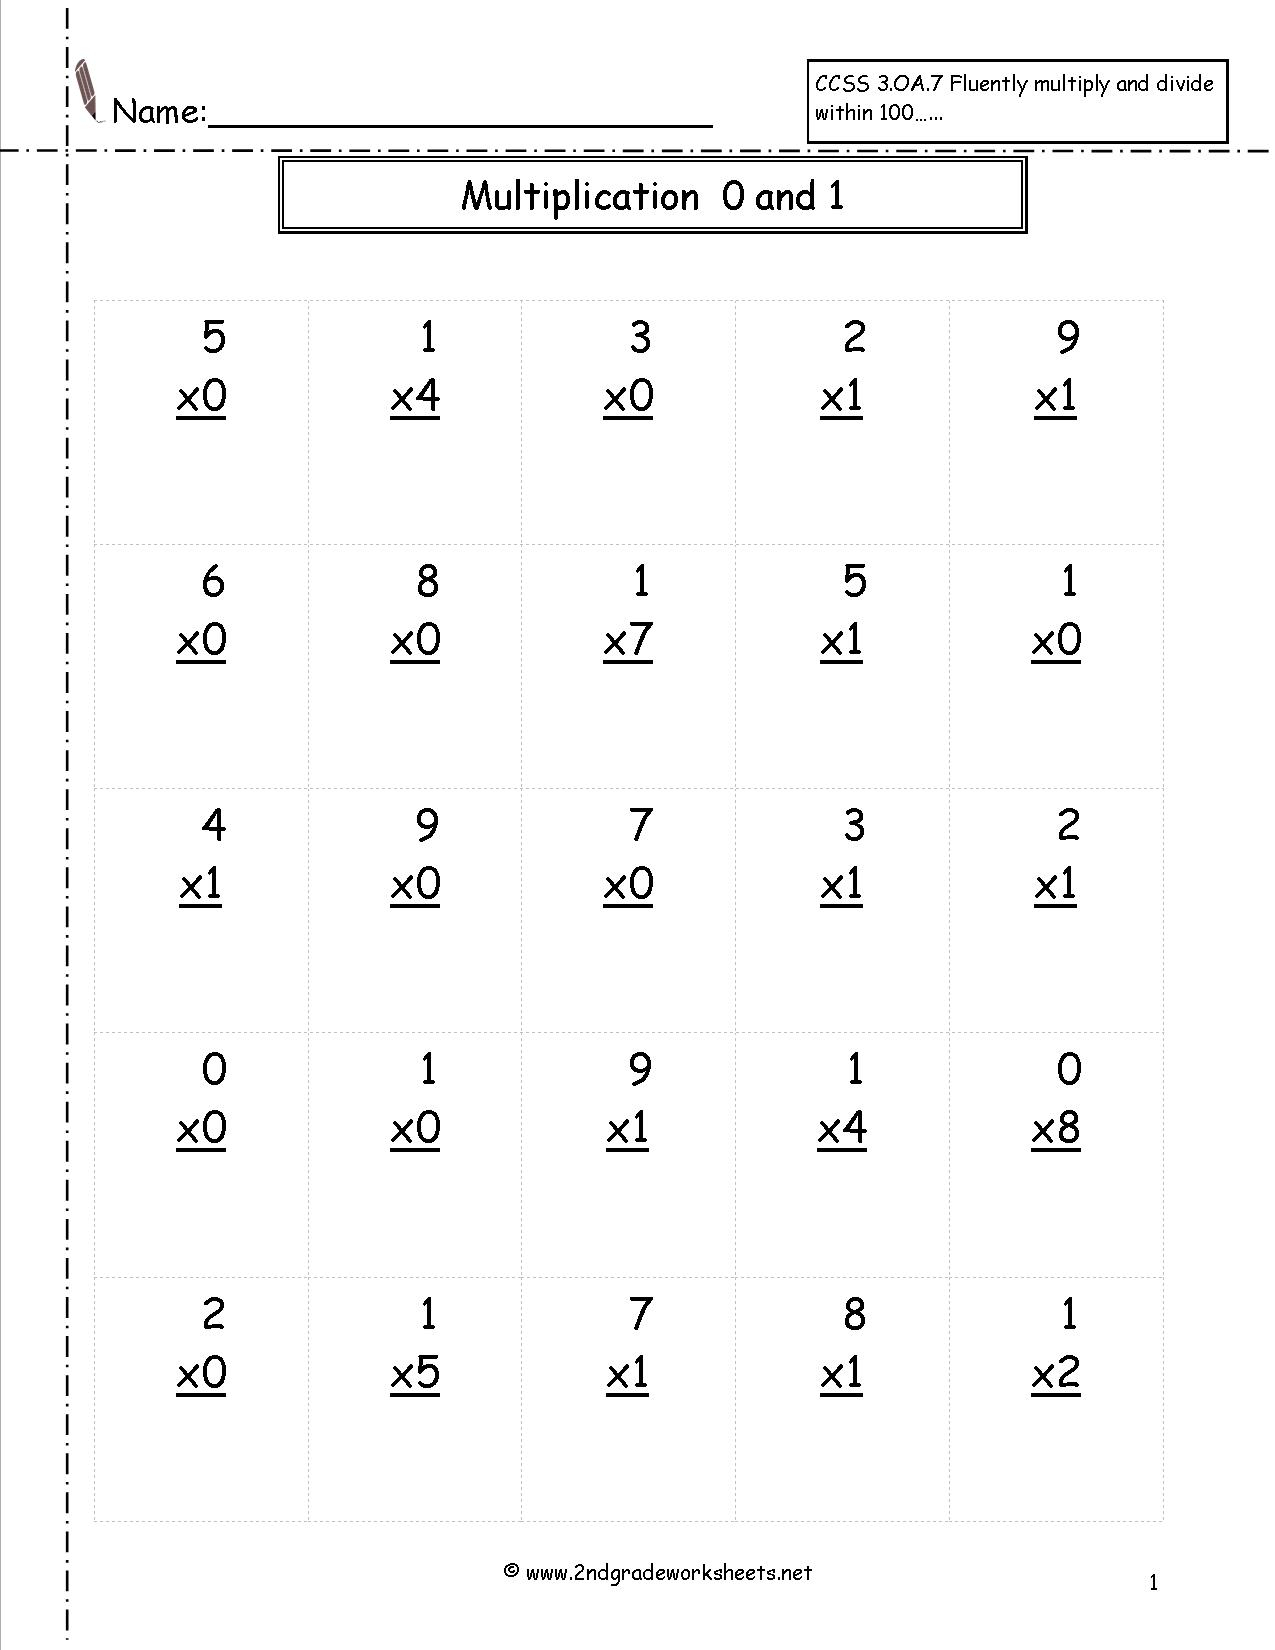 Multiplication Worksheets And Printouts in Multiplication Worksheets Year 4